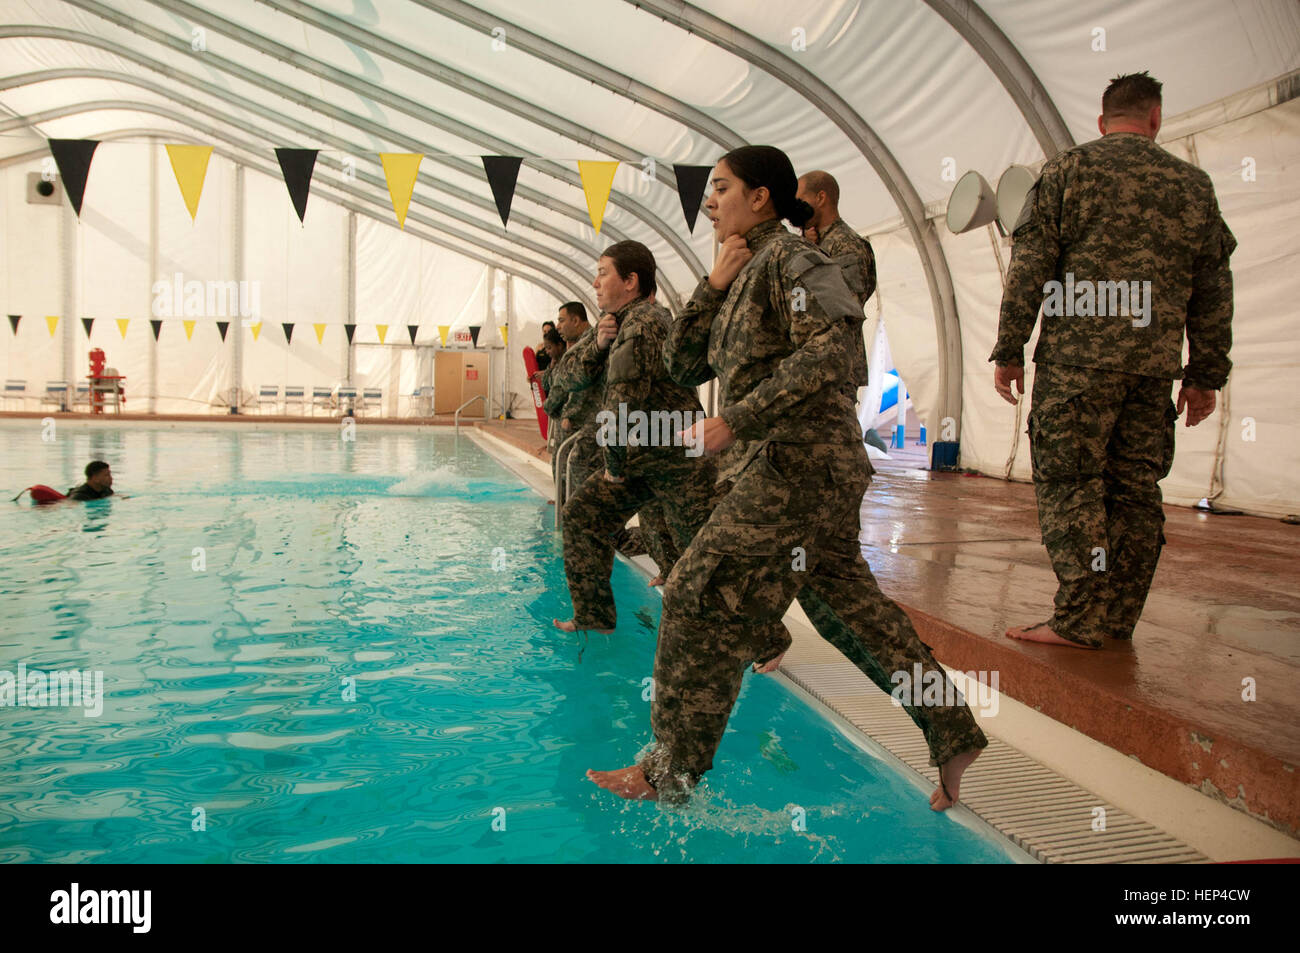 Pfc. Nicholle Salvatierra, a broadcast journalist, and Staff Sgt. Mary Healy, a visual information equipment maintainer, both with the 222nd Broadcast Operations Detachment, jump feet-first into the pool at the drown-proofing training session at Fort Irwin, Calif., Feb. 7, 2015. The 222nd BOD and the 302nd Mobile Public Affairs Detachment participated in drown proofing to prepare their Soldiers for the possibility of survival during an open water emergency. (U.S. Army photo by Sgt. David L. Nye, 204th PAD) Public affairs learns water survival in the desert 150207-A-ZZ999-005 Stock Photo